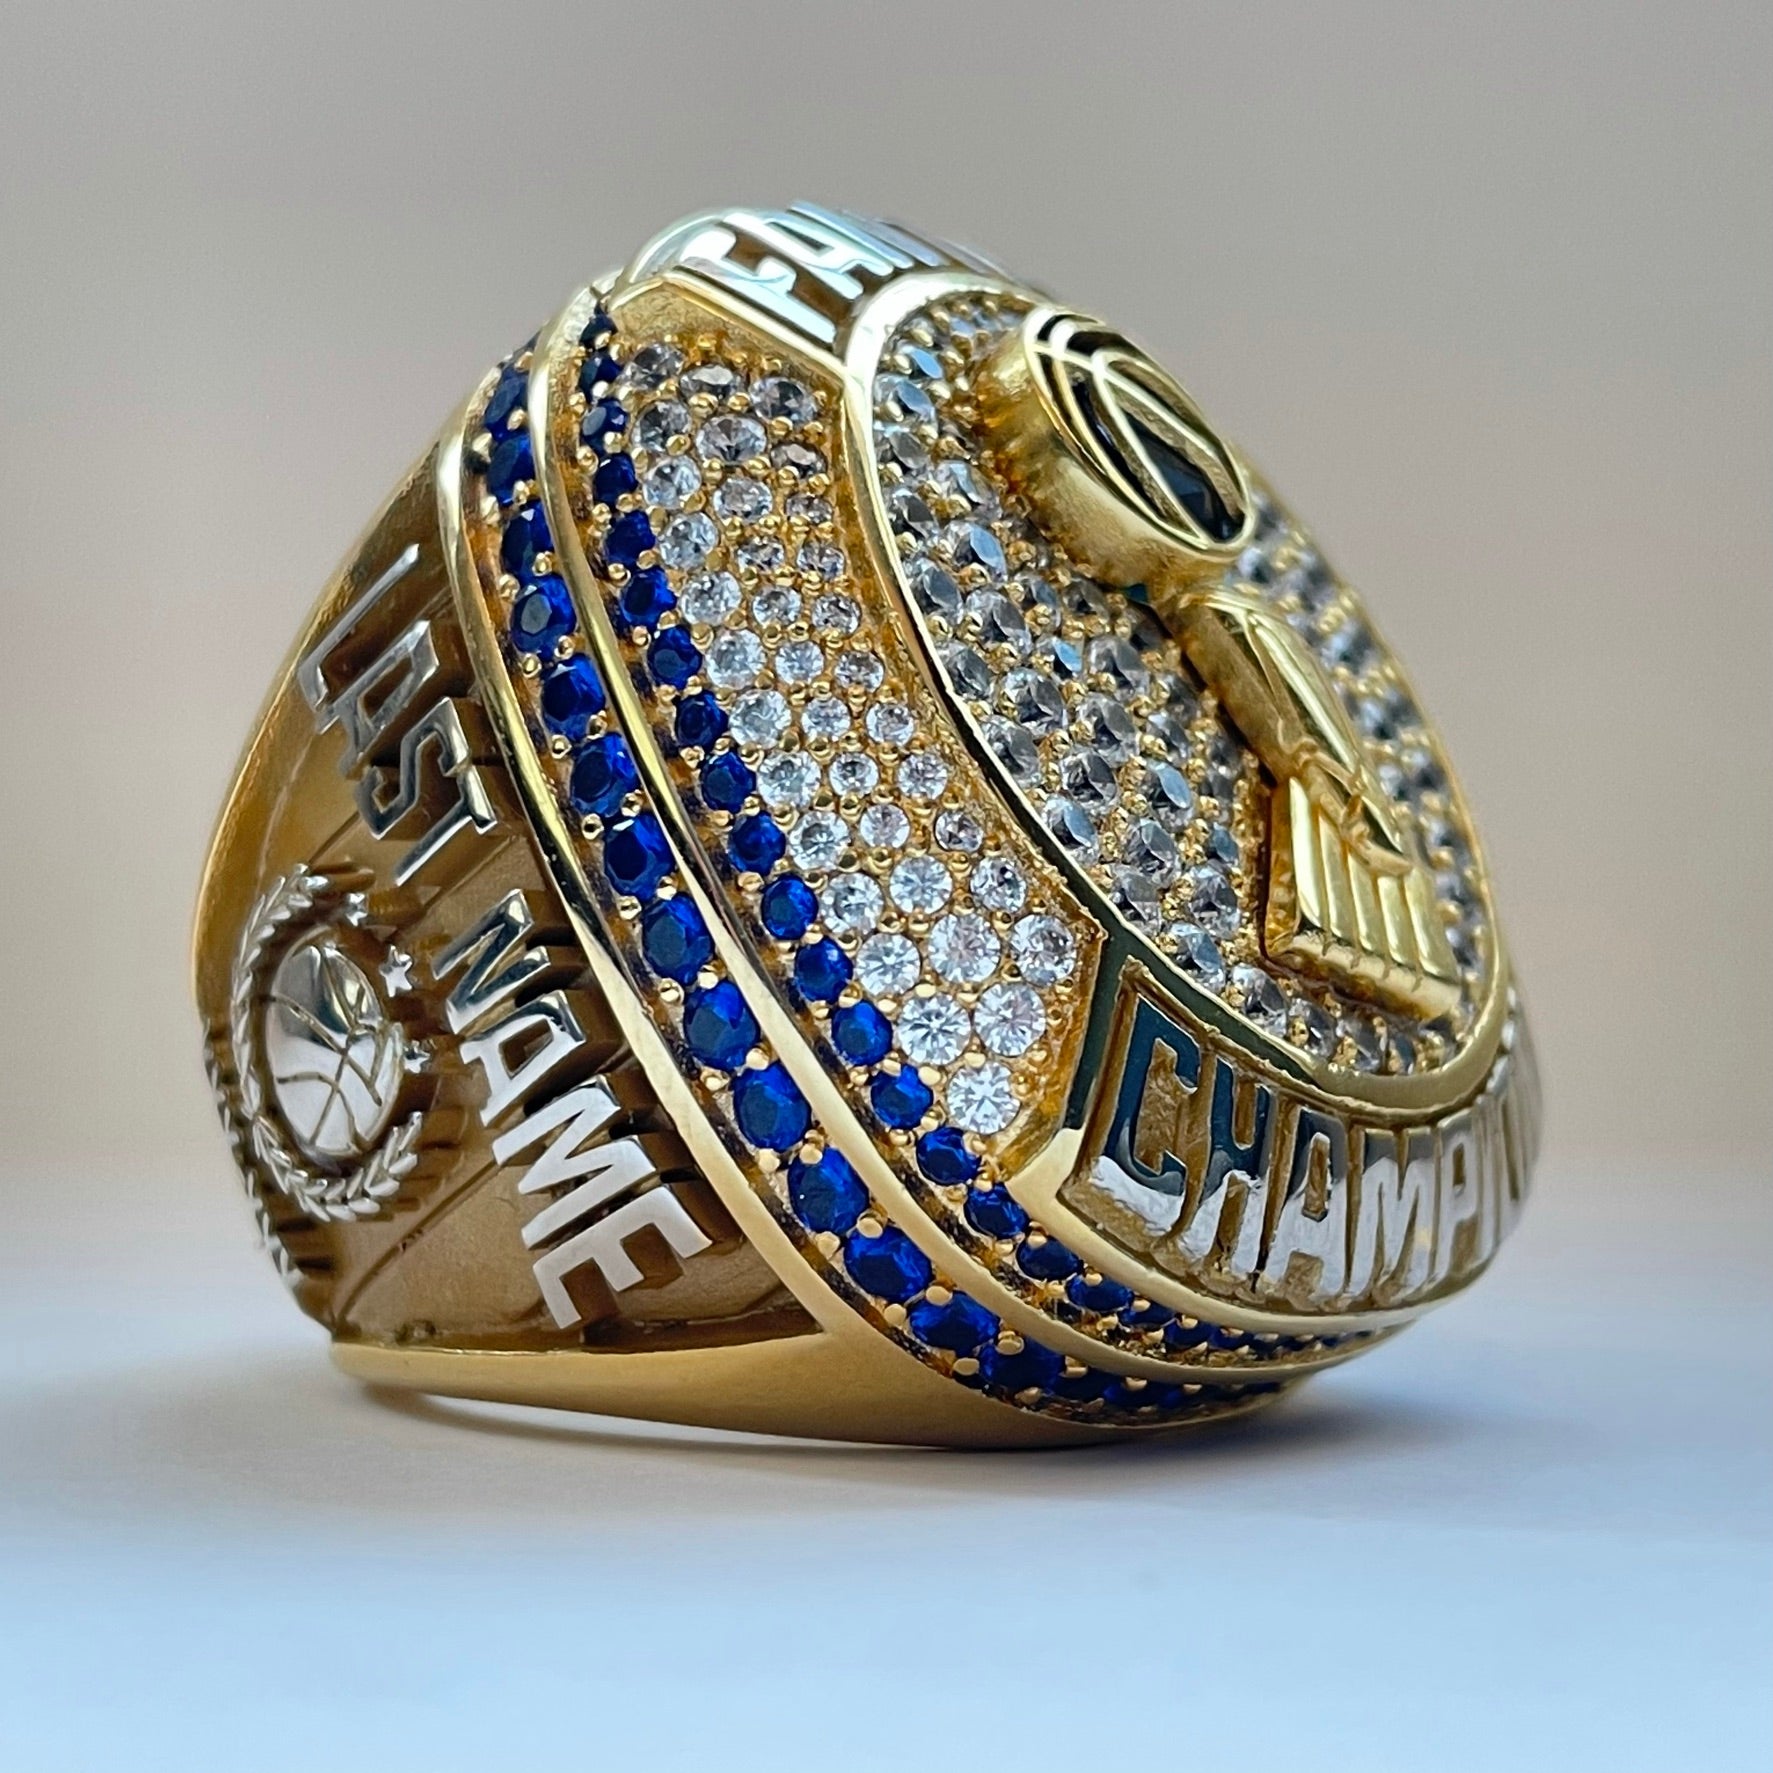 The story behind the jeweler who made the Warriors' championship rings